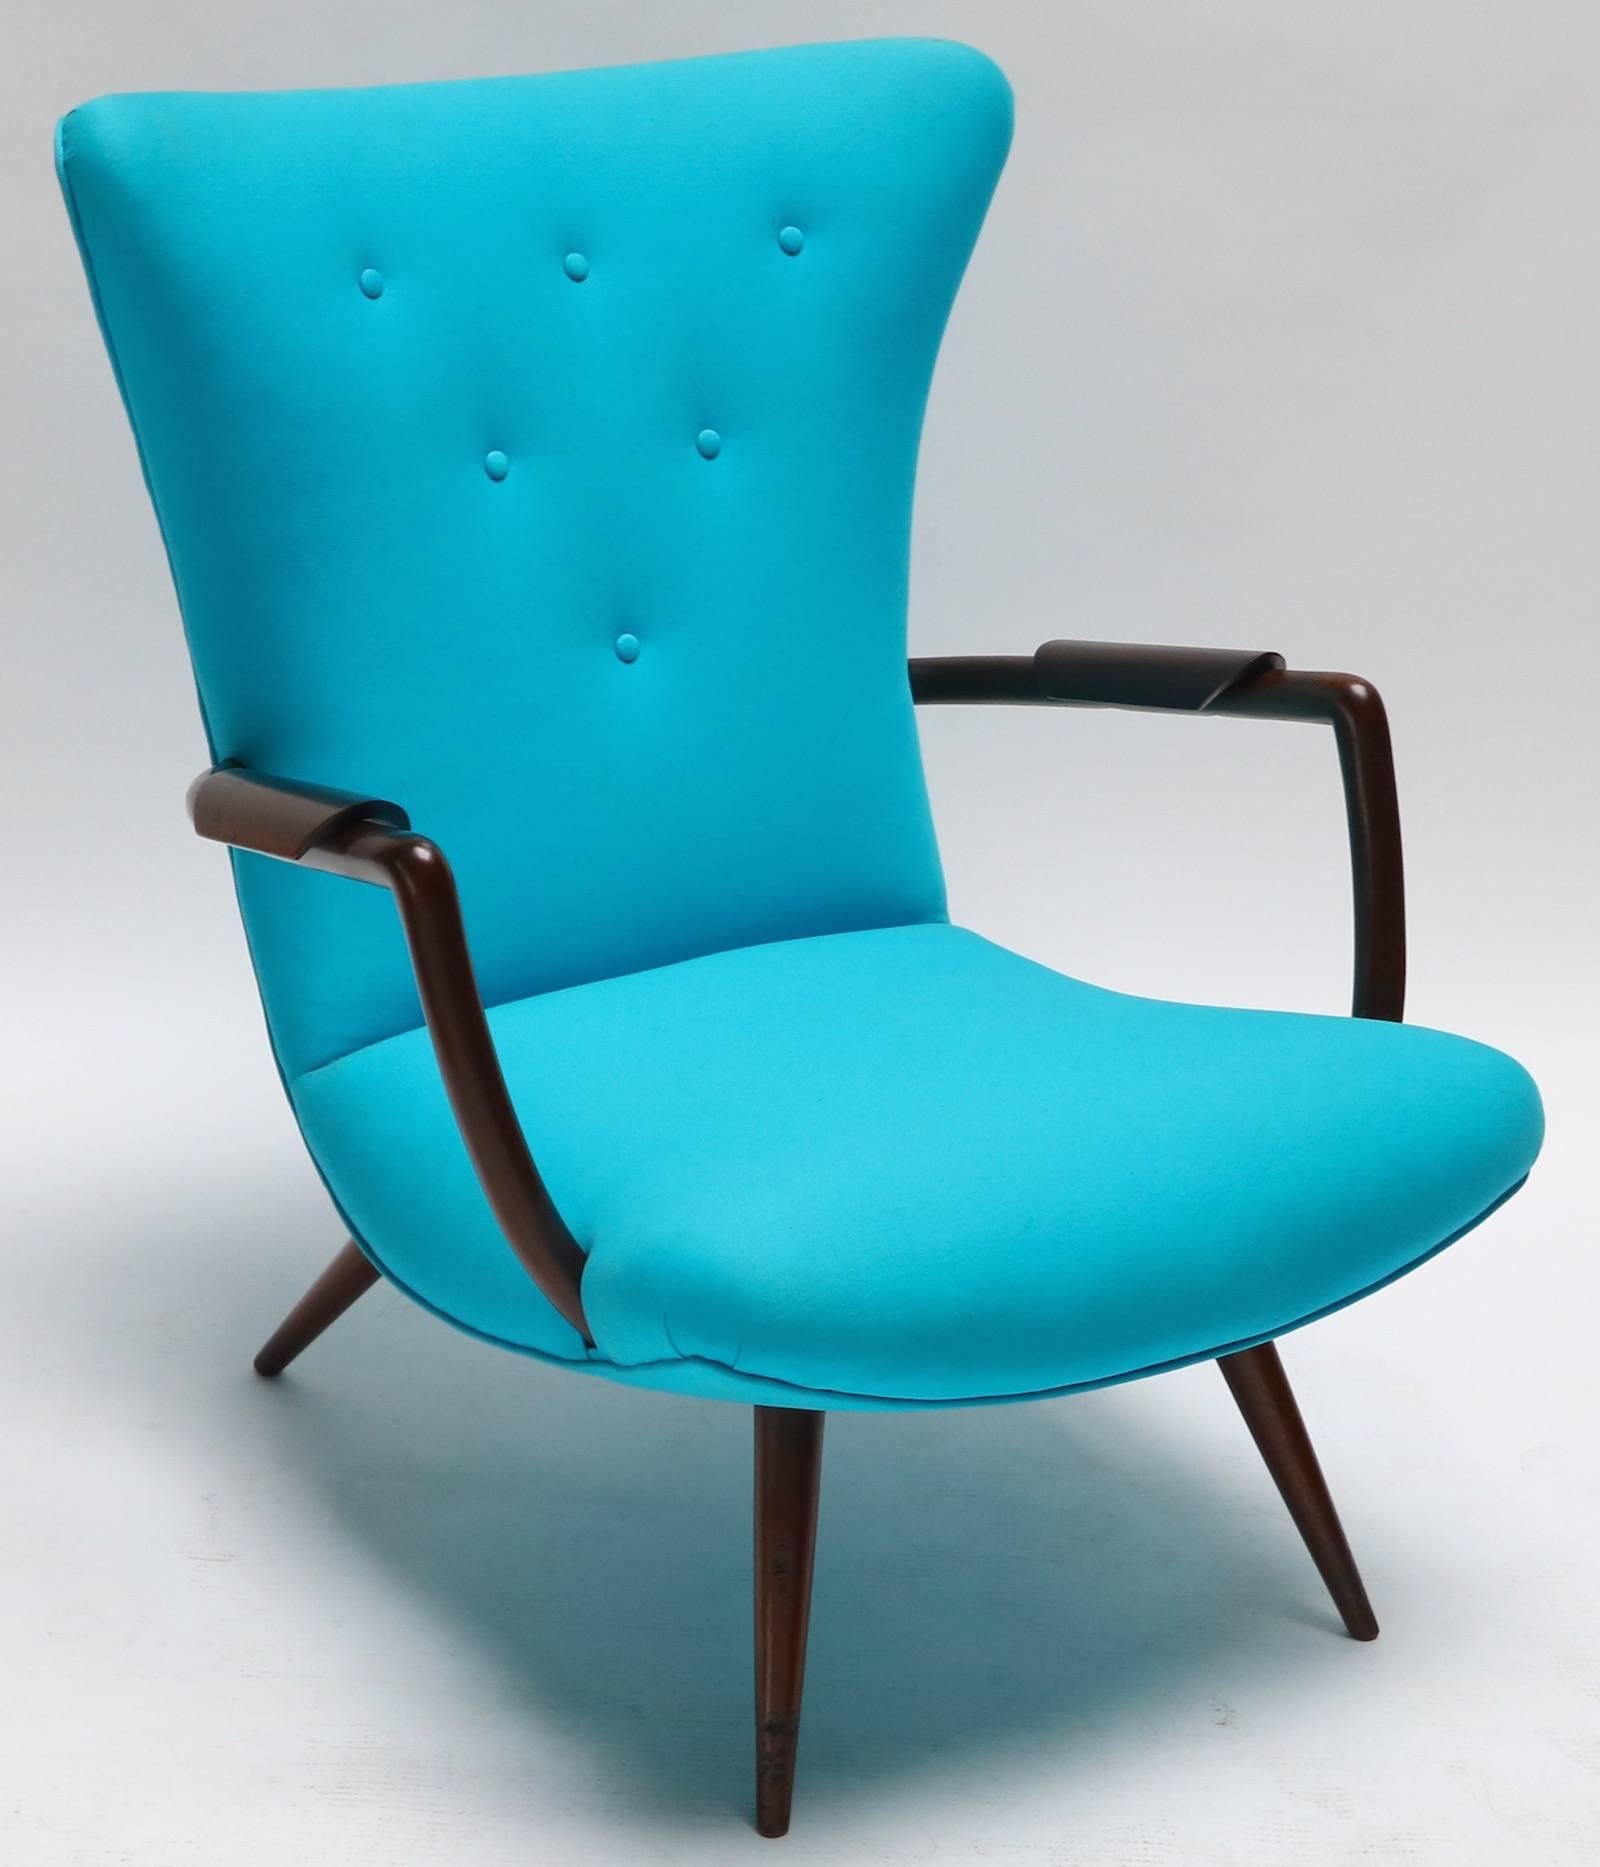 Pair of Brazilian Paulistana armchairs in the style of Giuseppe Scapinelli with unique wood armrests upholstered in turquoise blue twill.